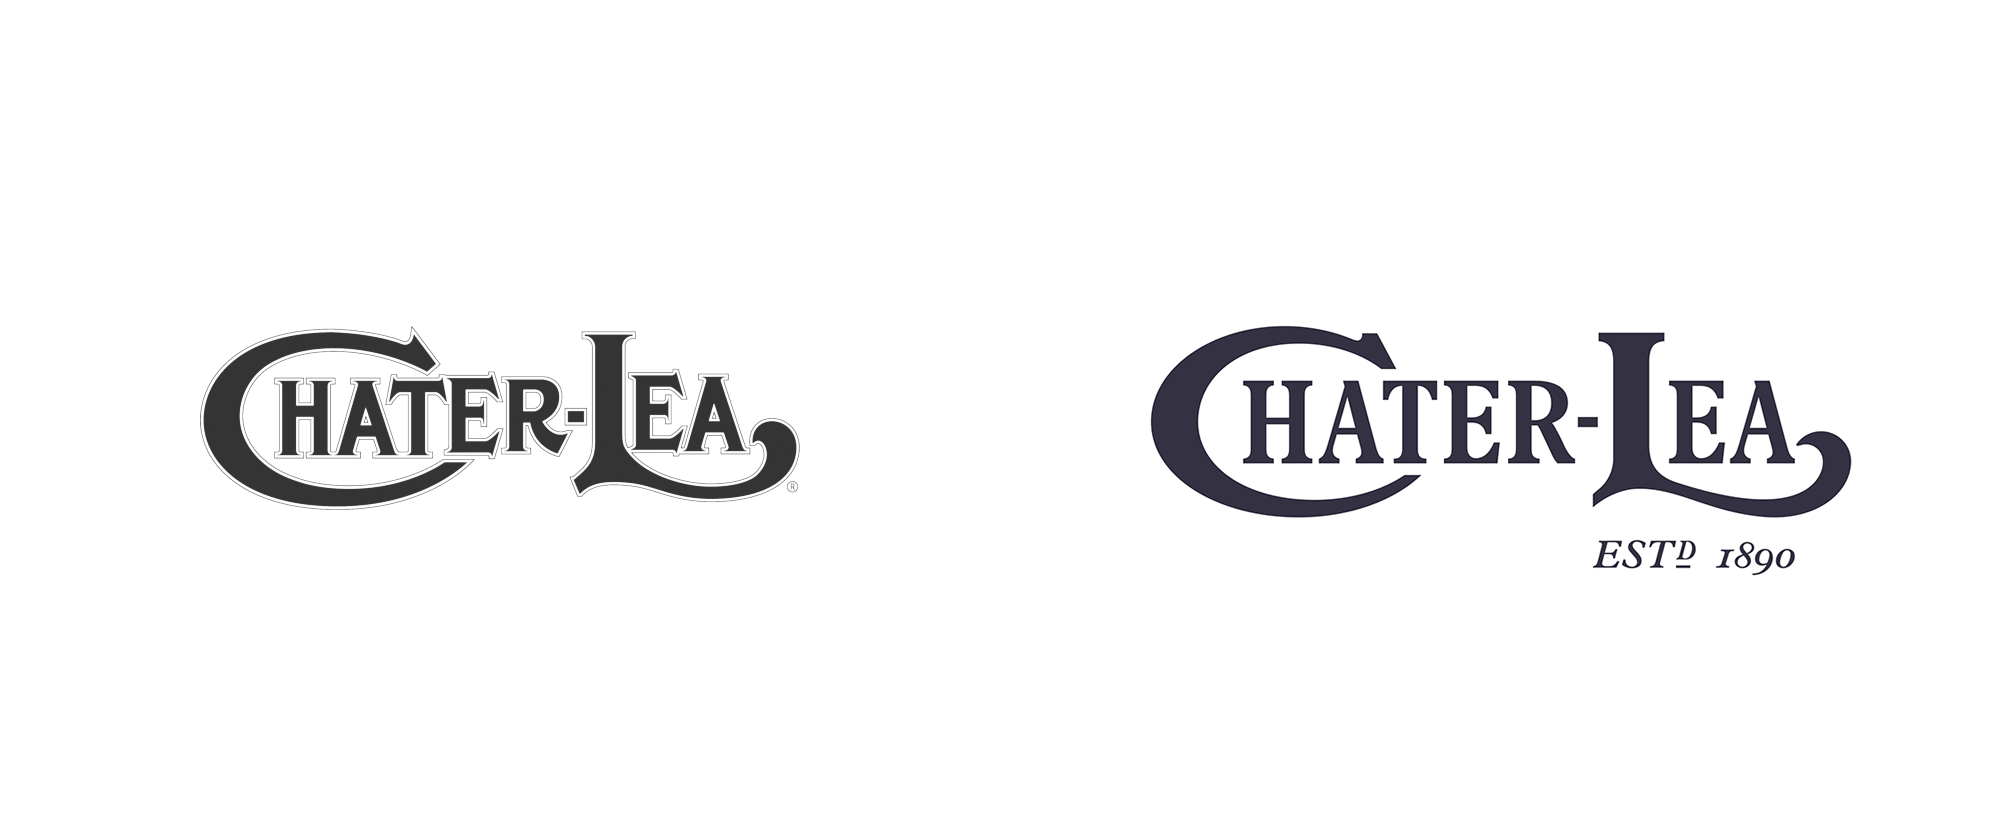 New Logo and Identity for Chater-Lea by Nous House